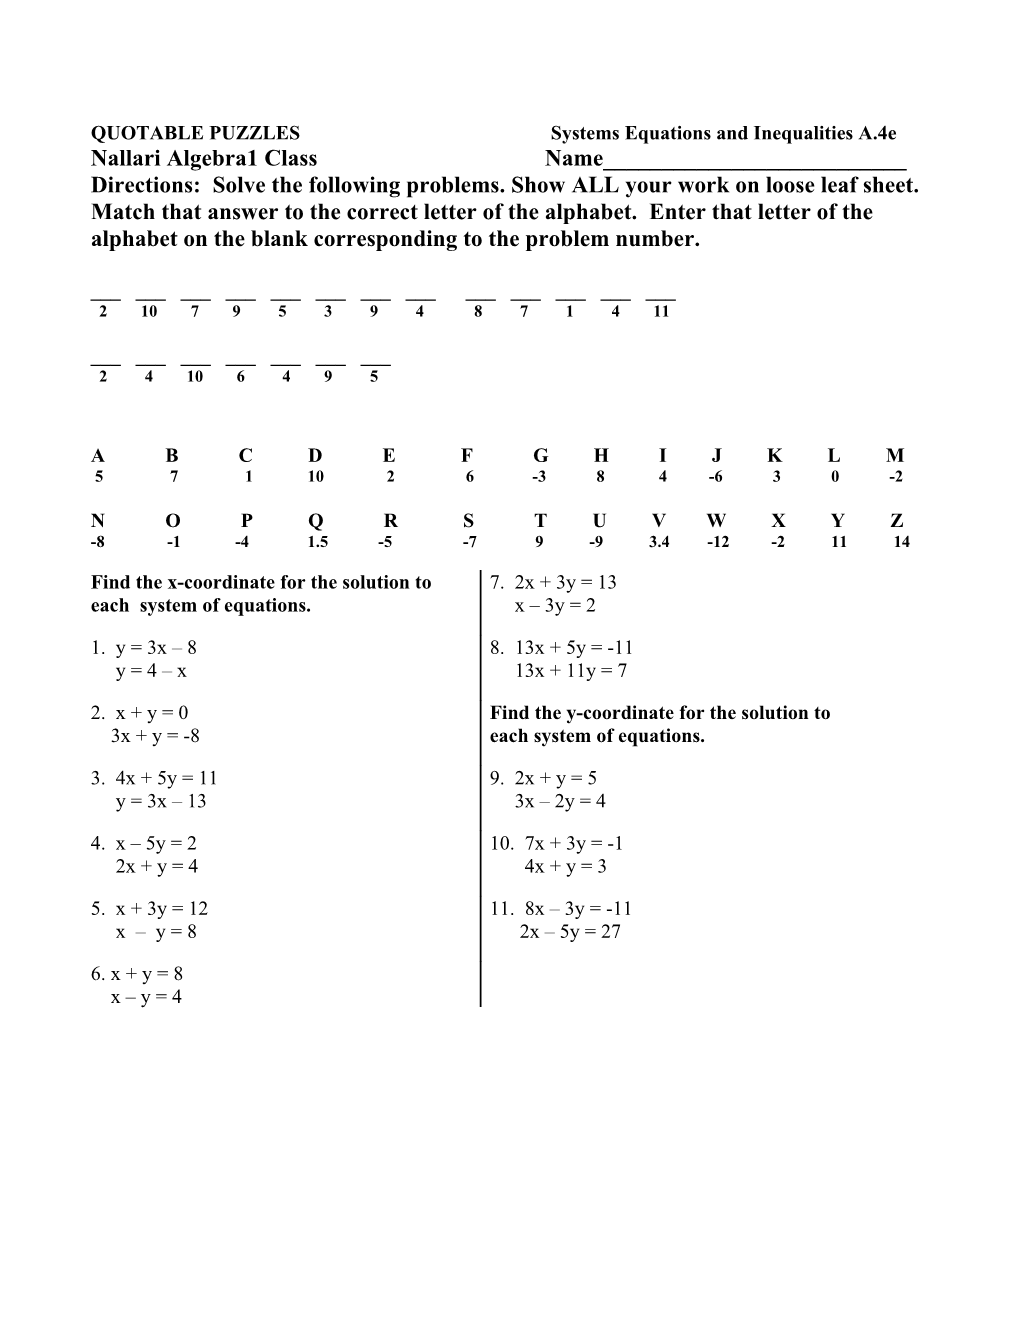 QUOTABLE PUZZLES Systems Equations and Inequalities A.4E